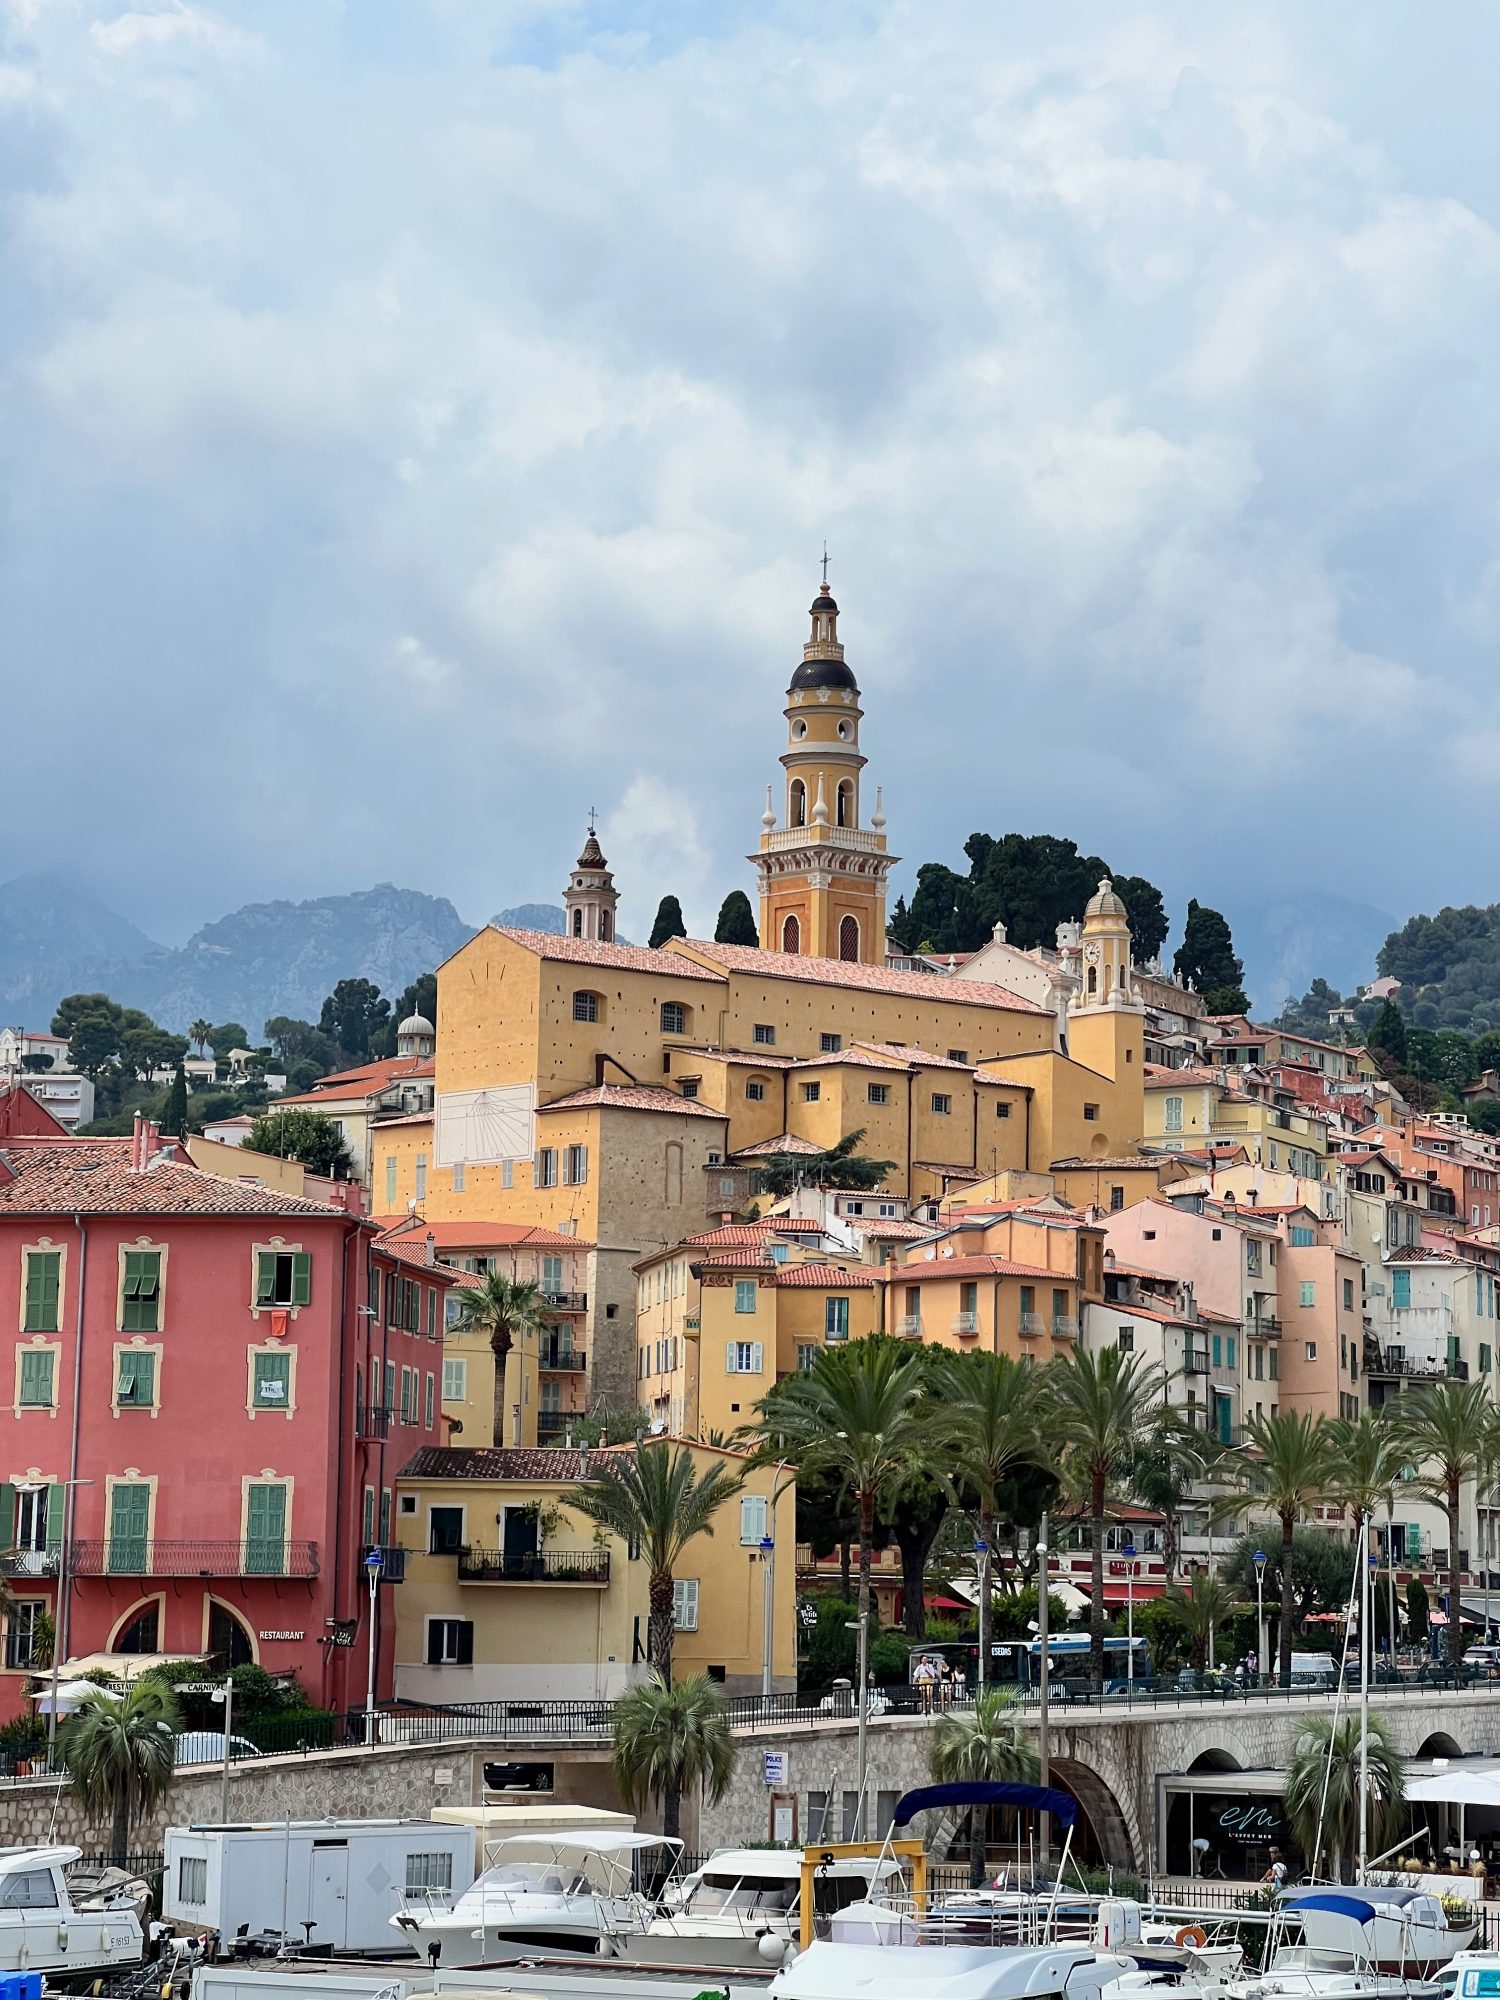 Charming city of Menton from the coastline.